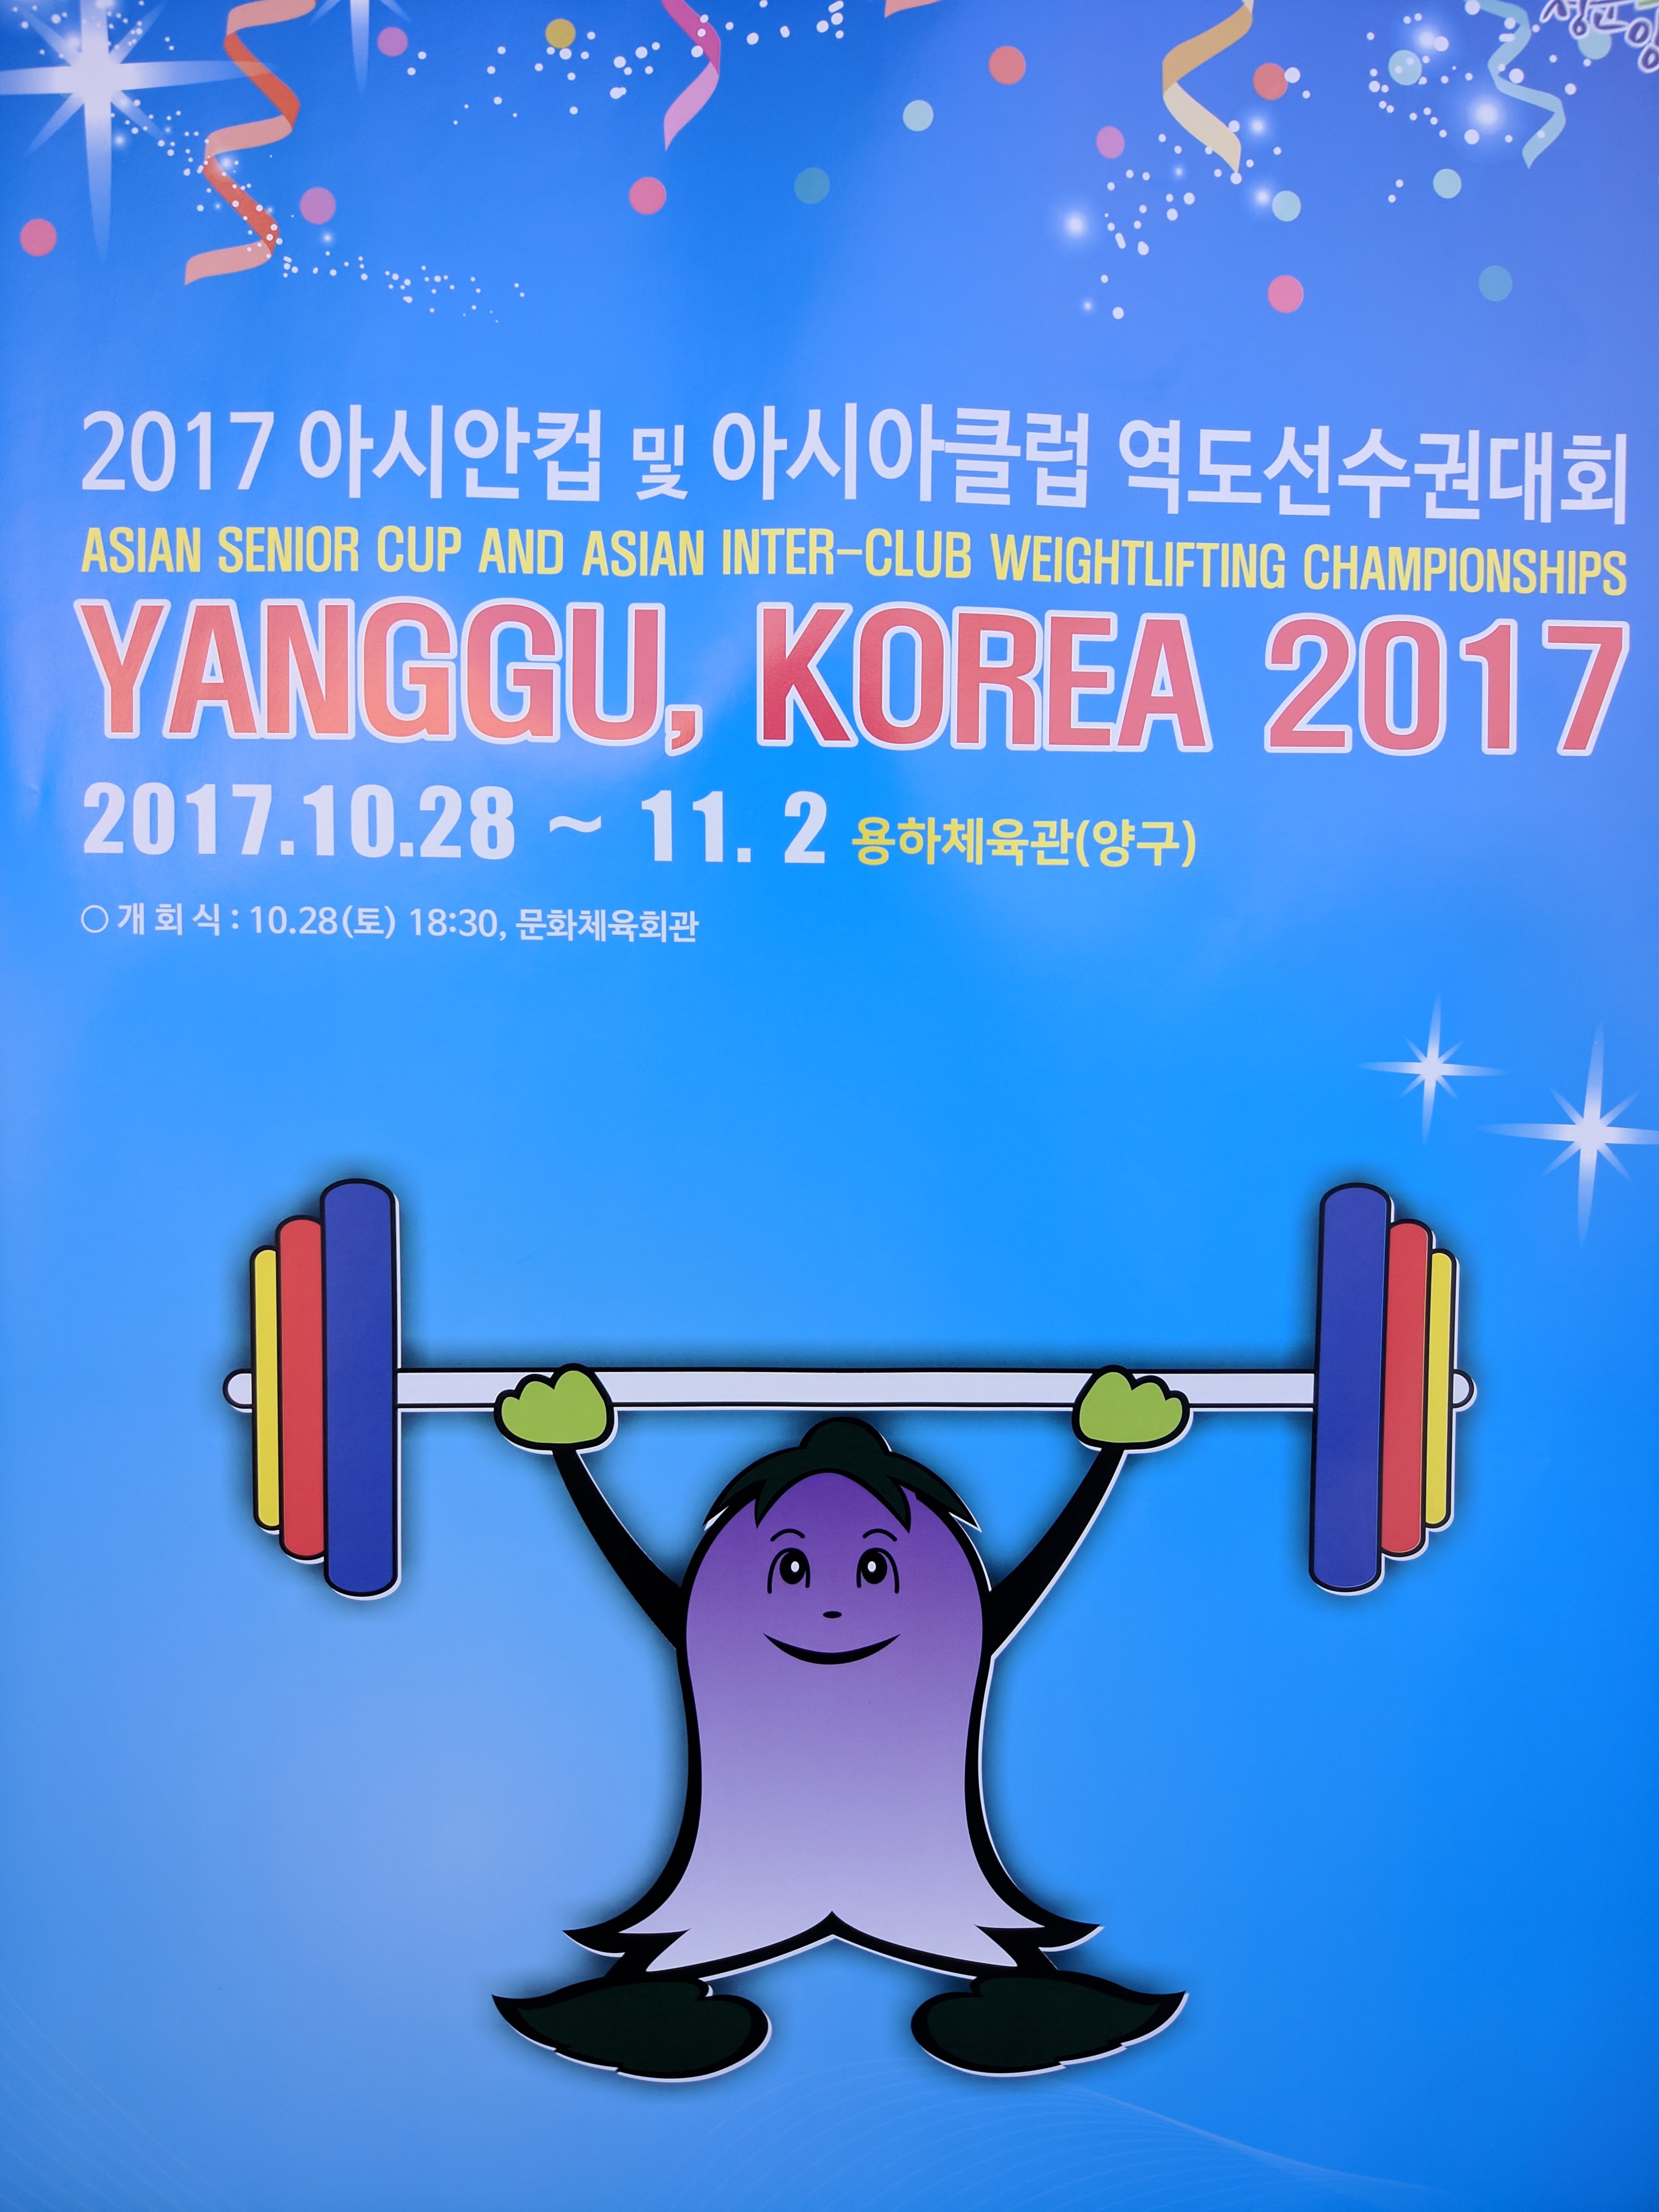 http://awfederation.com/results/226-result-asian-cup-asian-inter-club-weightlifting-championships-in-yanggu-korea-28-october-2017